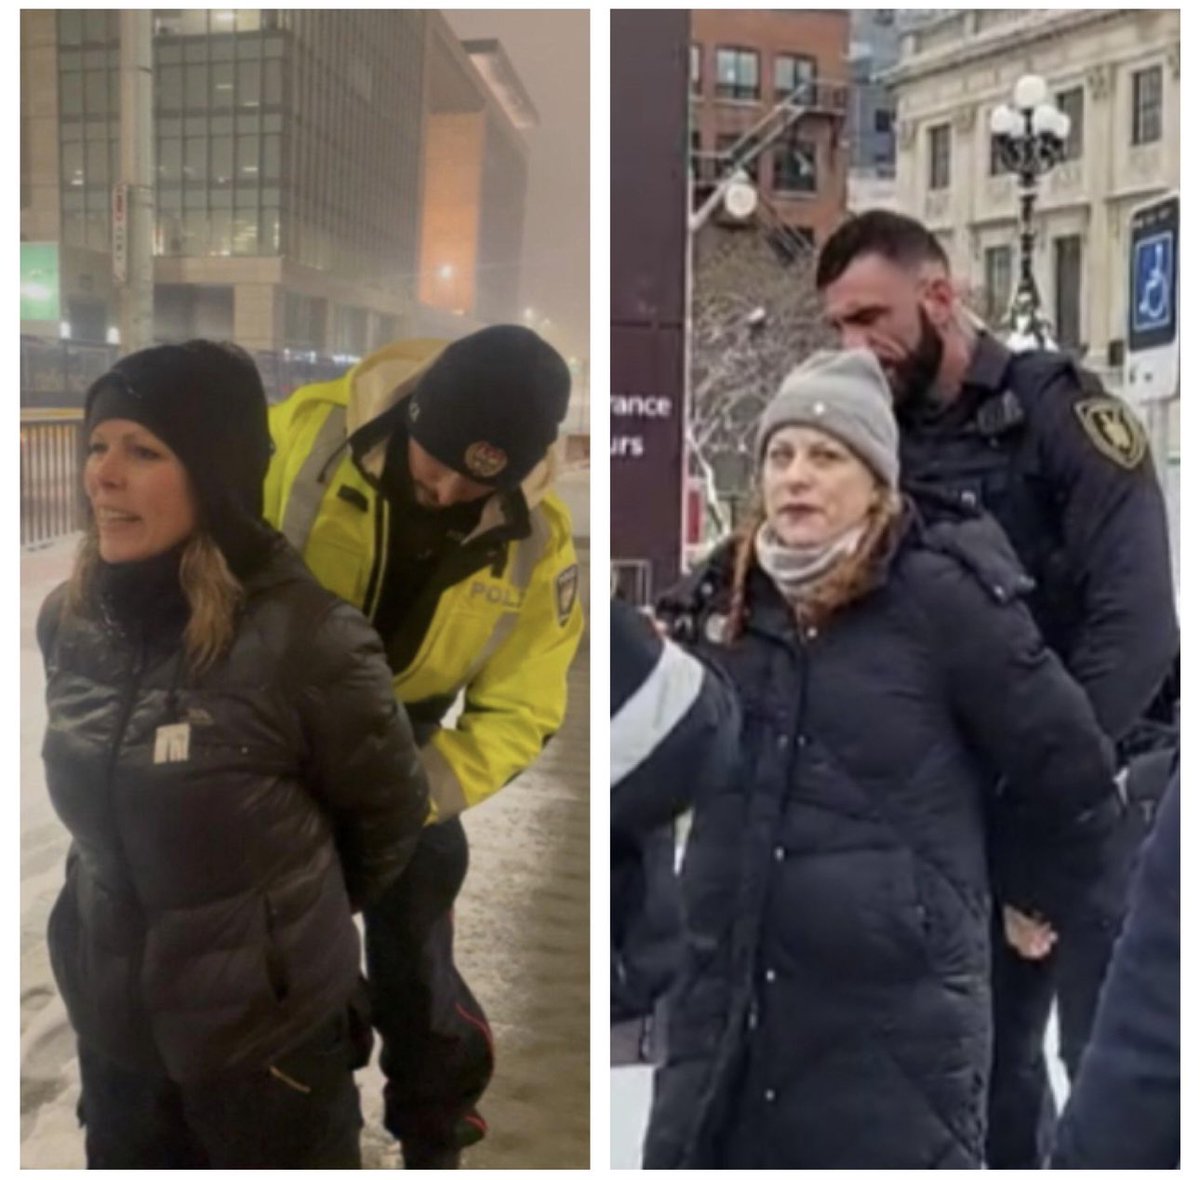 What’s wrong with this picture? The woman on the left, who had no prior criminal record, was held in jail for 50 DAYS, on mischief related charges & falsely accused of breaching bail. Straight up political persecution. The woman on the right, has relentlessly shamed &…